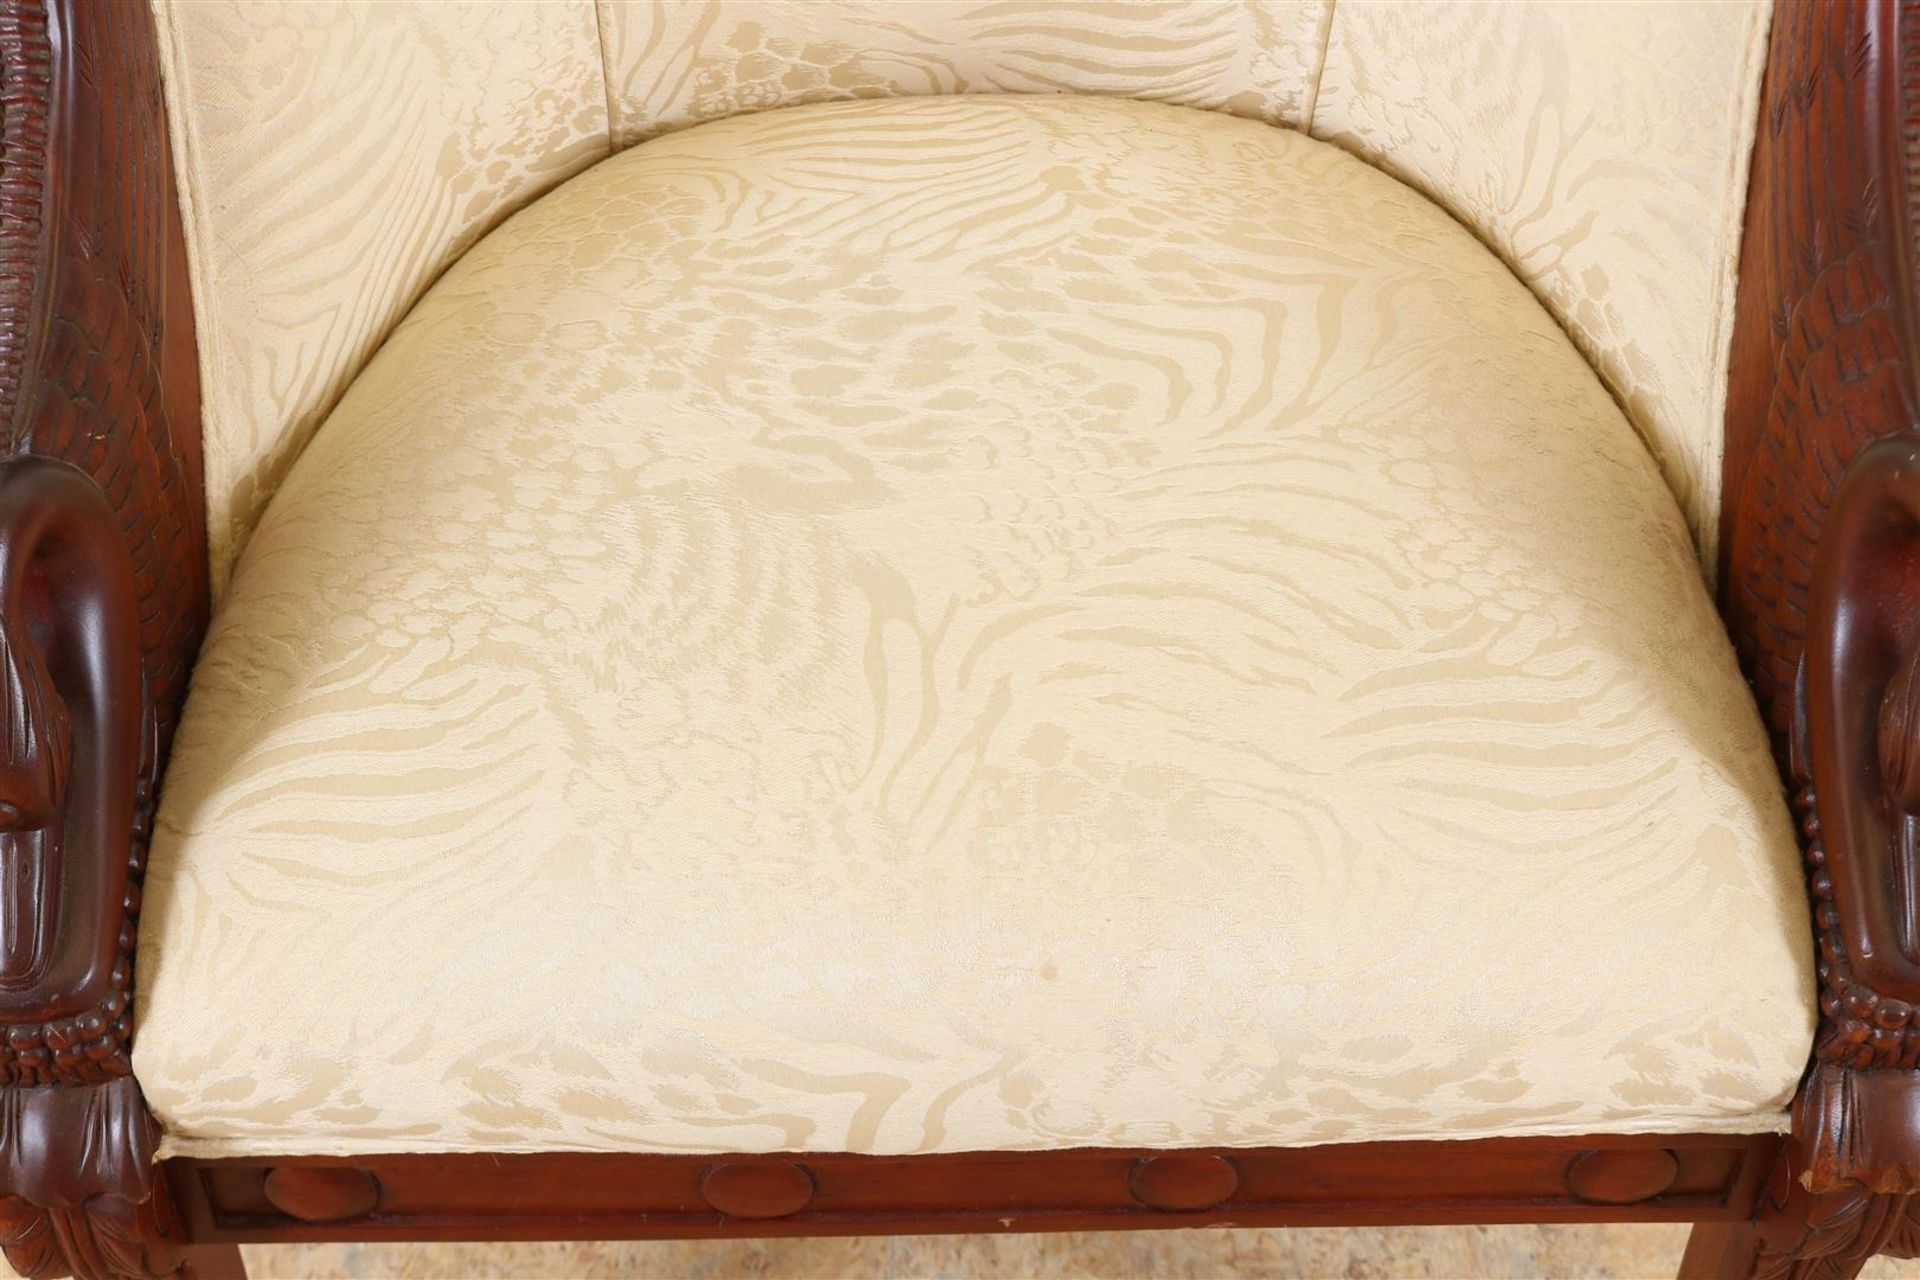 Mahogany Empire style armchair with cream fabric and stabbed swans, 20th century. - Image 3 of 5